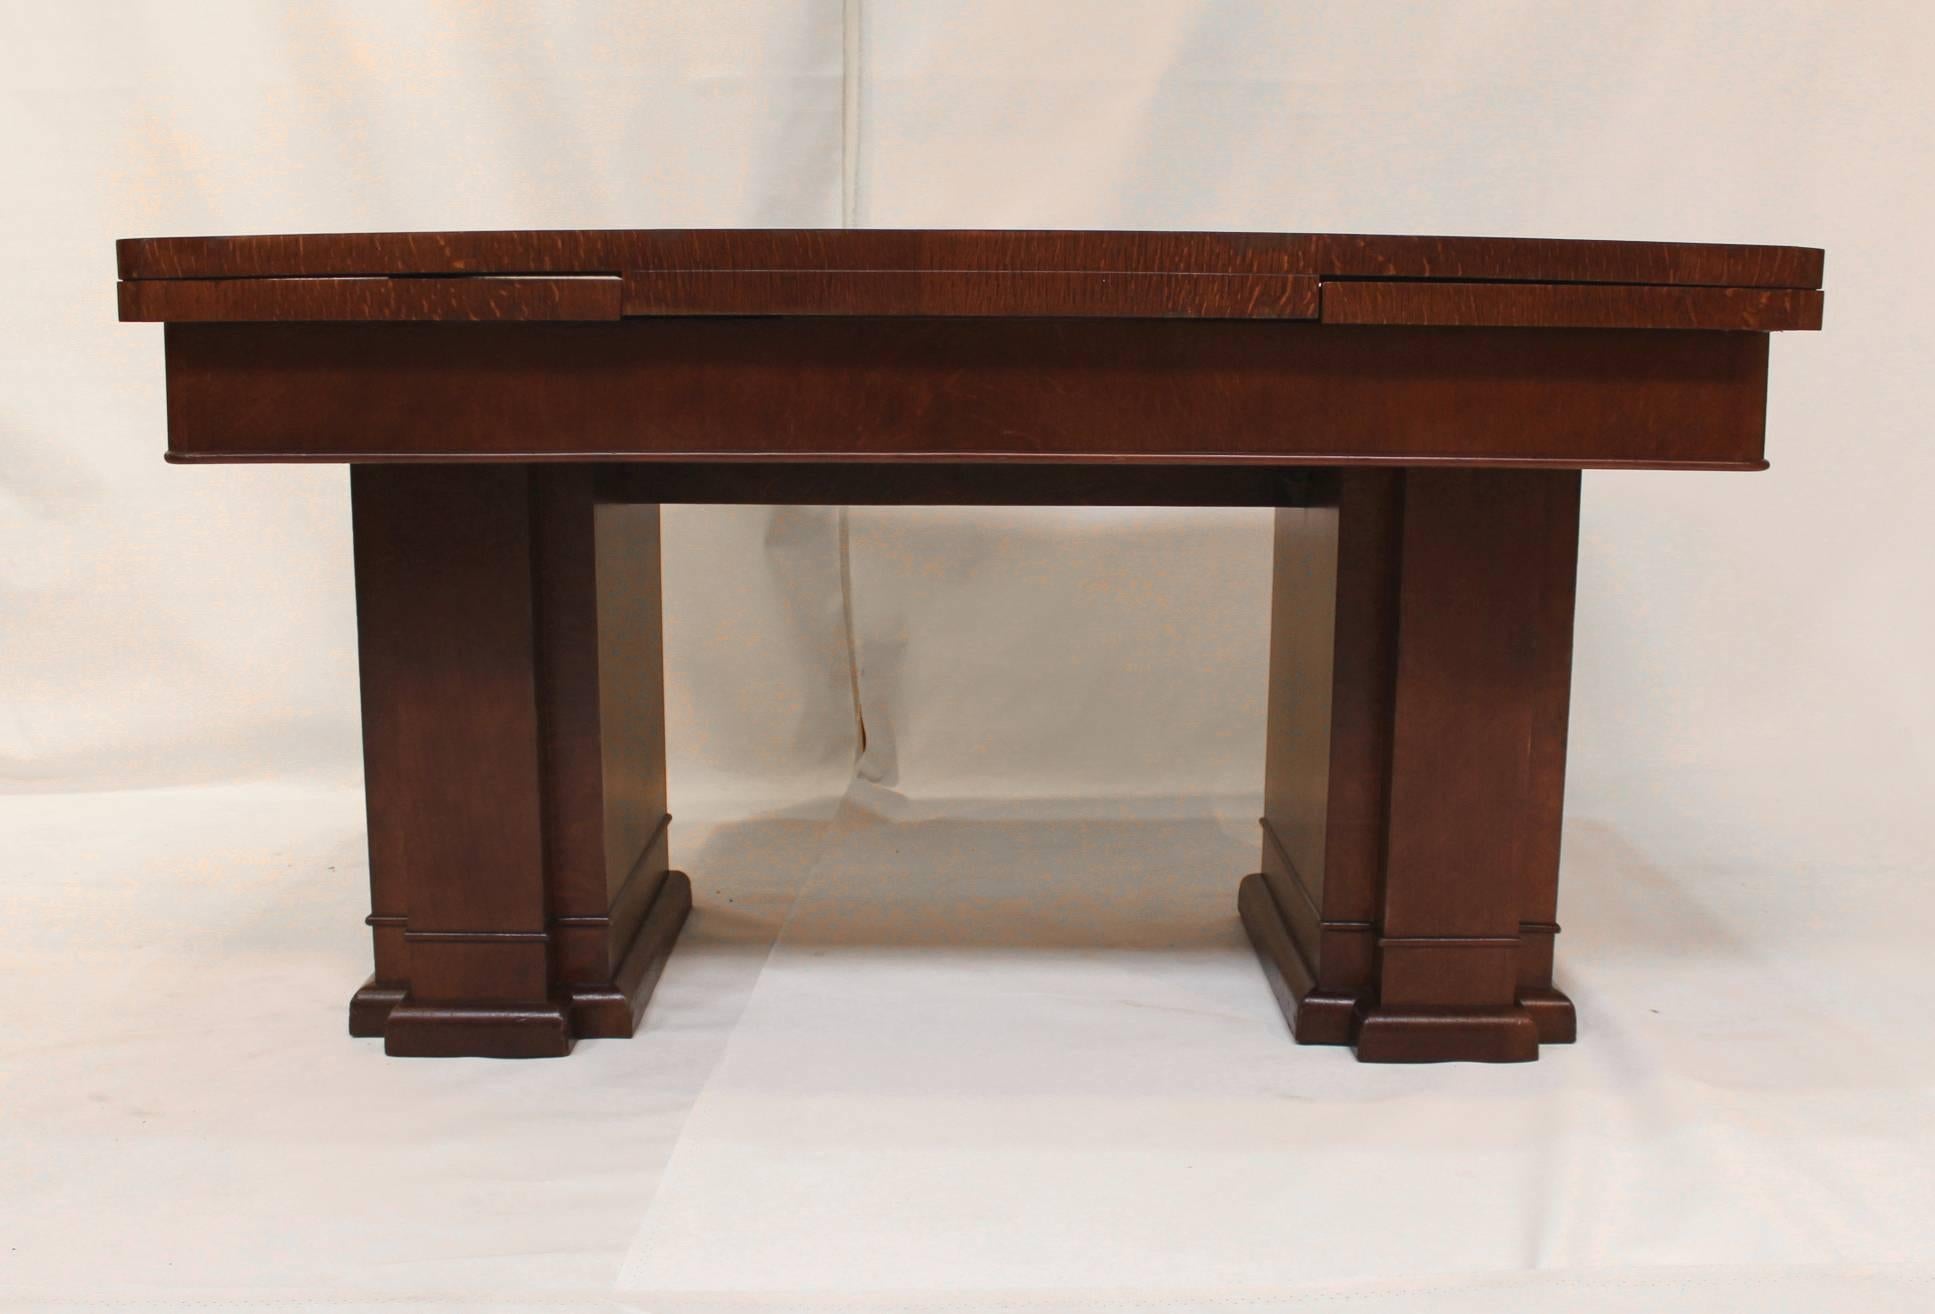 1930s early Art Deco architectural table. Quarter-sawn, tiger's-eye oak with amazing golden striping. Would make a spectacular desk as well.

Extends to 84